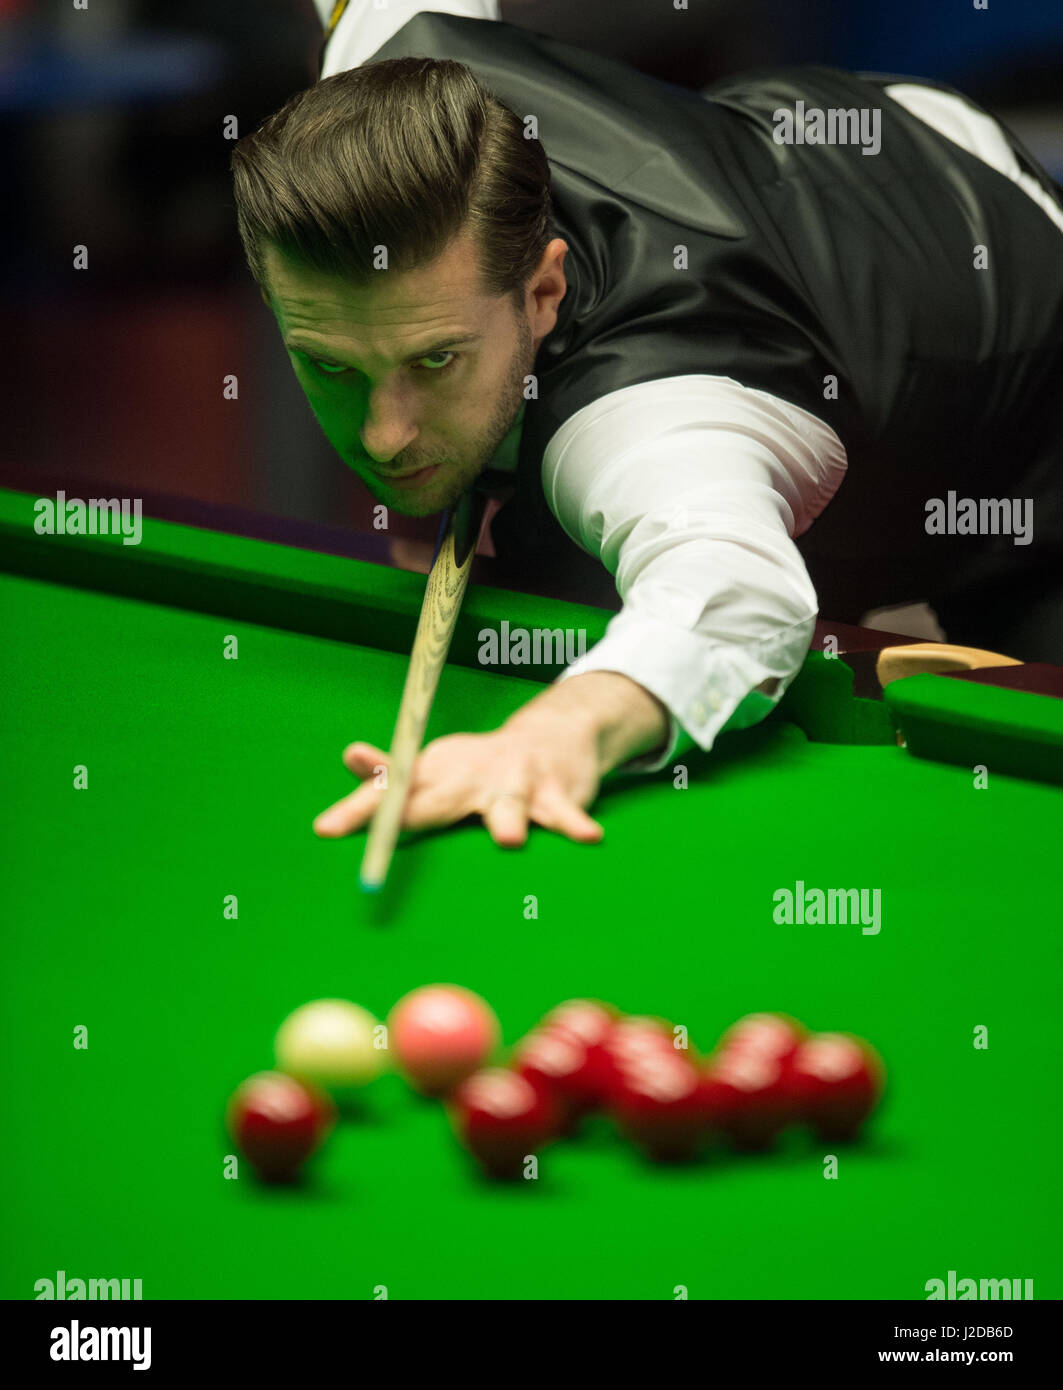 Sheffield, UK. 27th Apr, 2017. Mark Selby of England competes during the first session of the semifinal match against Ding Junhui of China during the World Snooker Championship 2017 at the Crucible Theatre in Sheffield, UK, on April 27, 2017. Credit: Jon Buckle/Xinhua/Alamy Live News Stock Photo